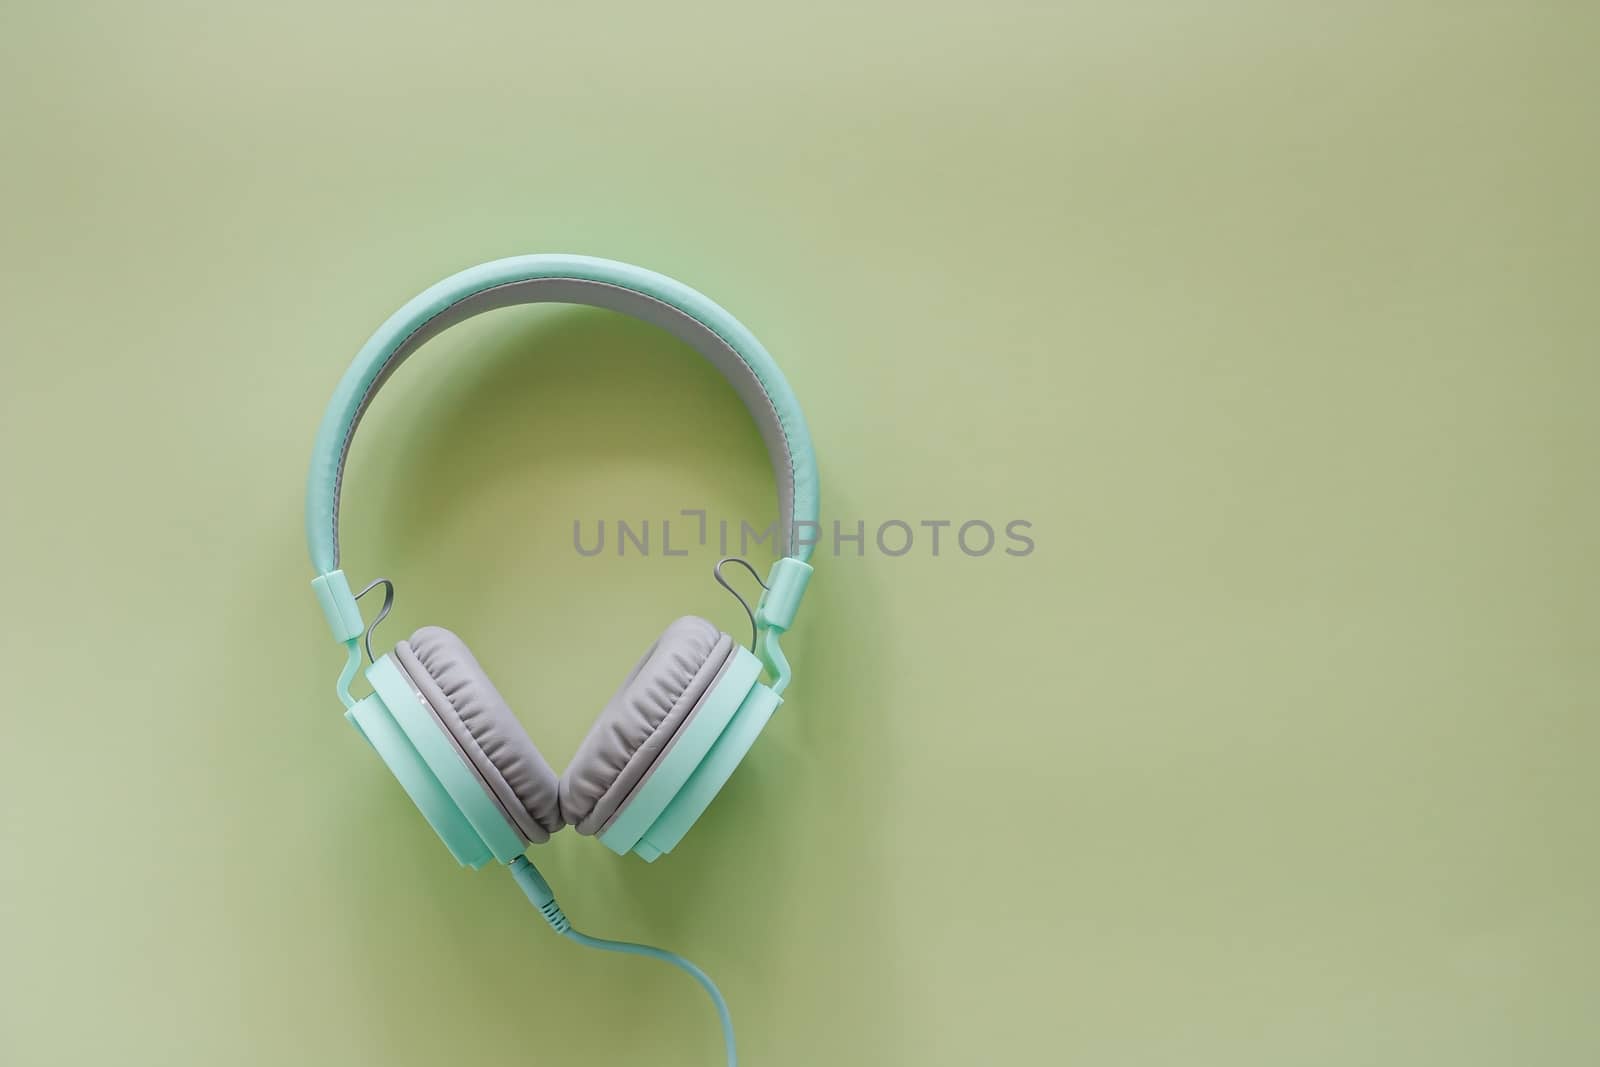 Headphones on green background for music and relaxation concept